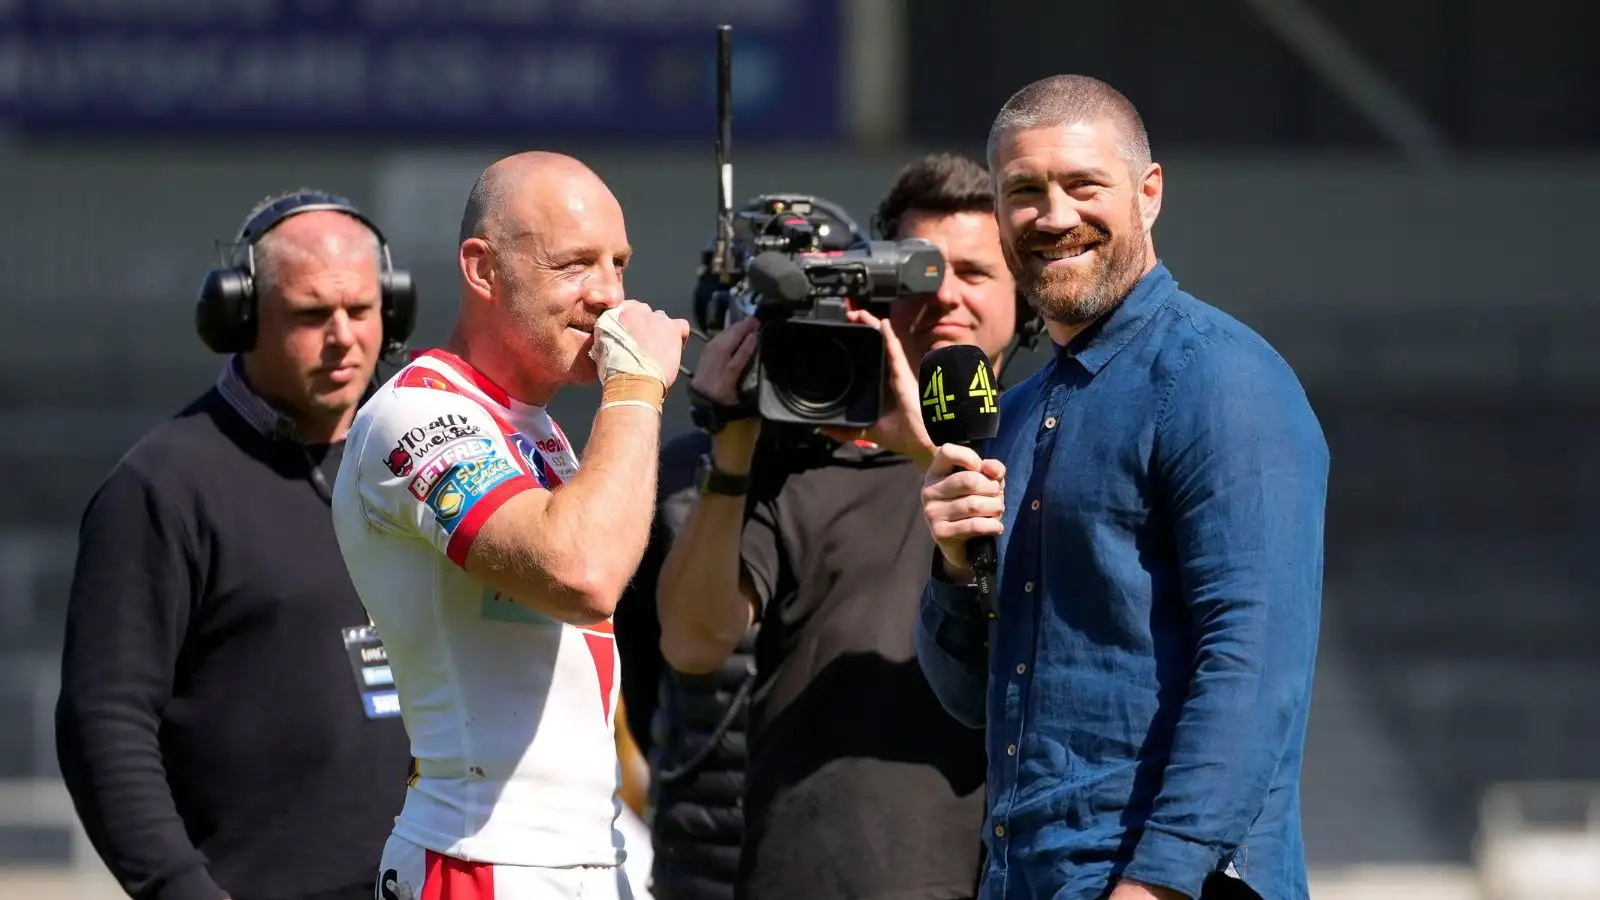 Former Warrington Wolves man Kyle Amor interviewing St Helens skipper James Roby on Channel 4. Photo by Steve Flynn/News Images.